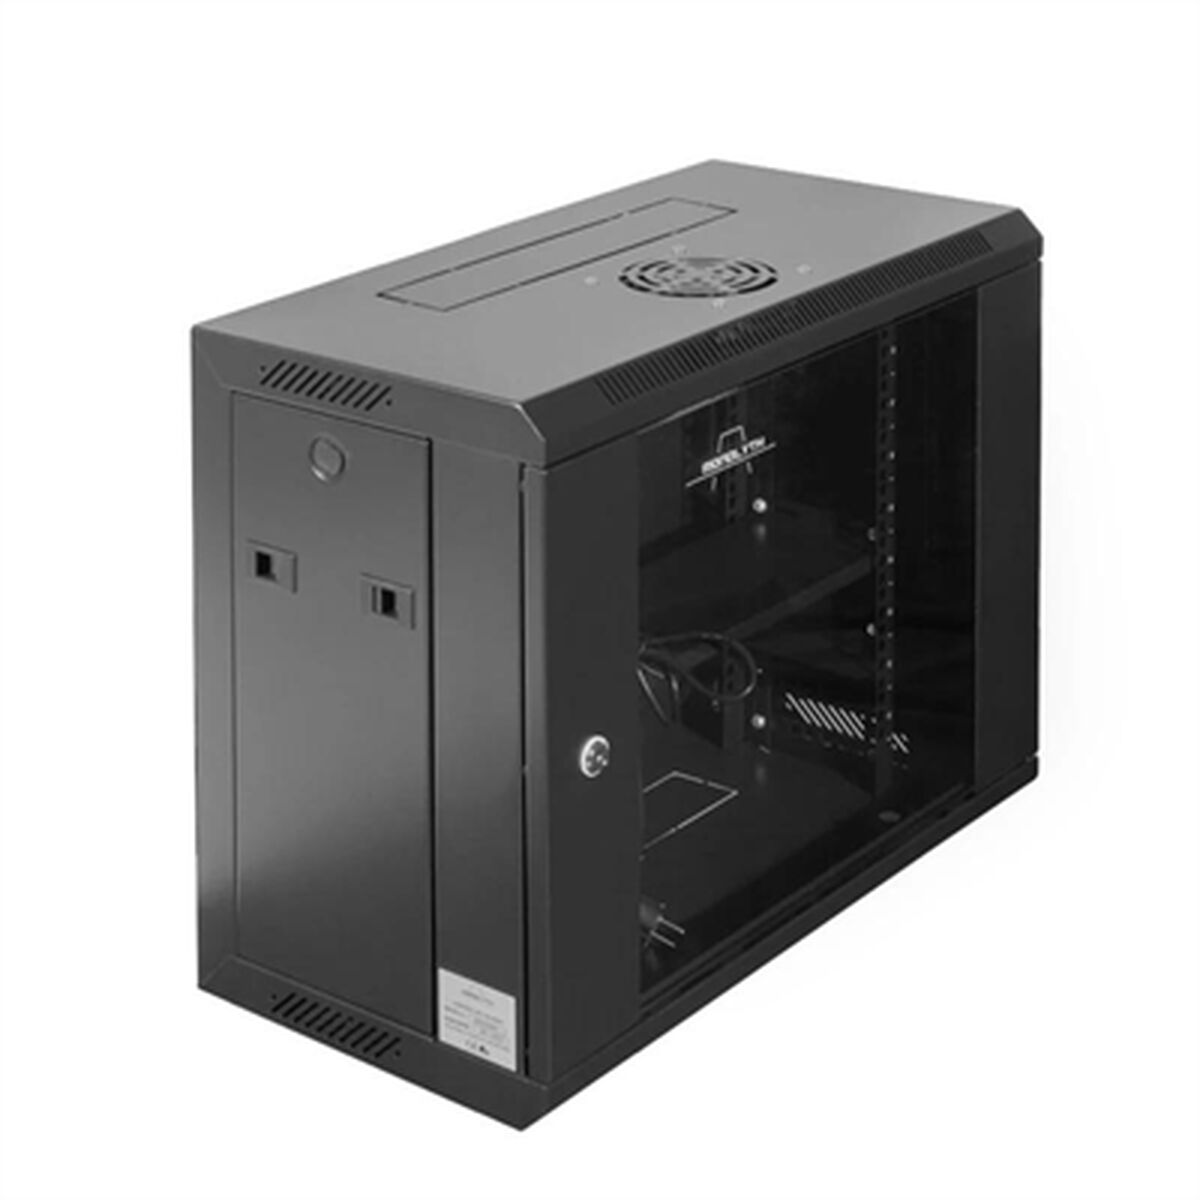 Wall-mounted Rack Cabinet Monolyth 9U SH6309, Monolyth, Computing, Accessories, wall-mounted-rack-cabinet-monolyth-9u-sh6309, Brand_Monolyth, category-reference-2609, category-reference-2803, category-reference-2828, category-reference-t-19685, category-reference-t-19908, category-reference-t-21349, Condition_NEW, furniture, networks/wiring, organisation, Price_100 - 200, Teleworking, RiotNook